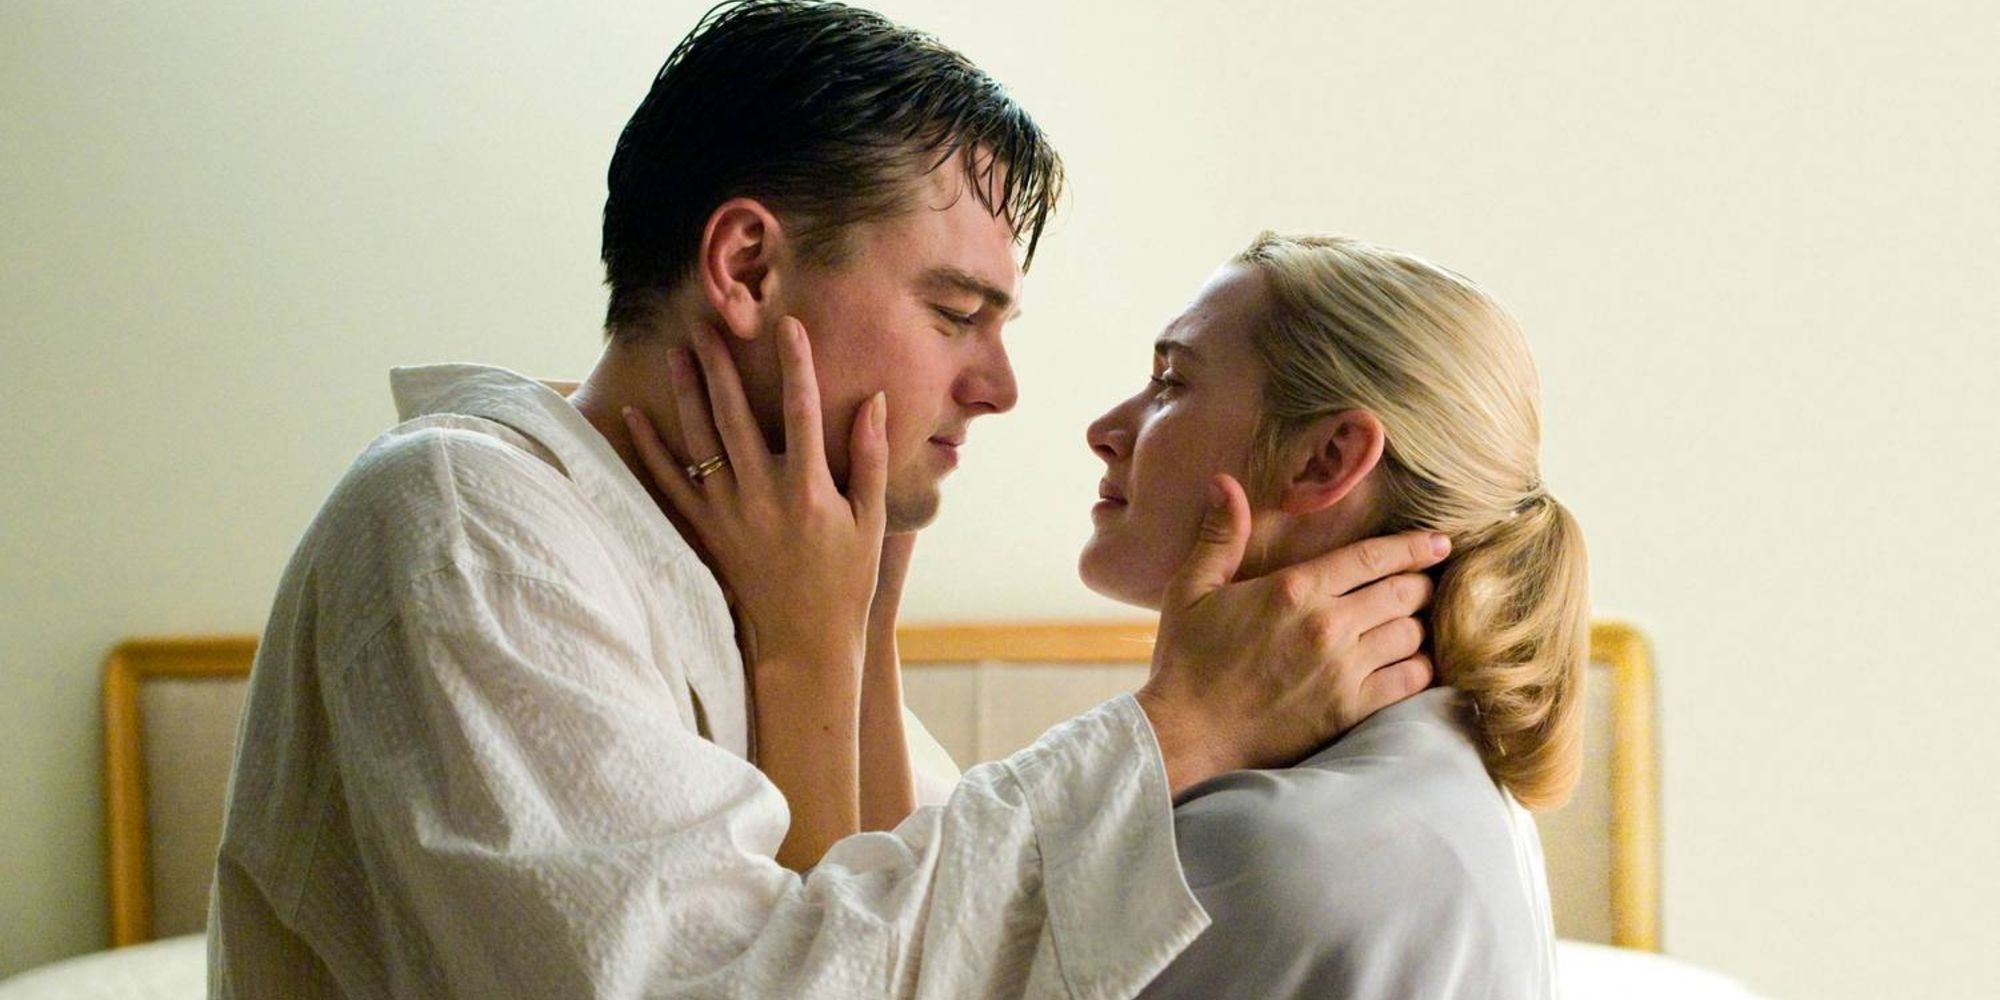 April and Frank touching each other in Revolutionary Road